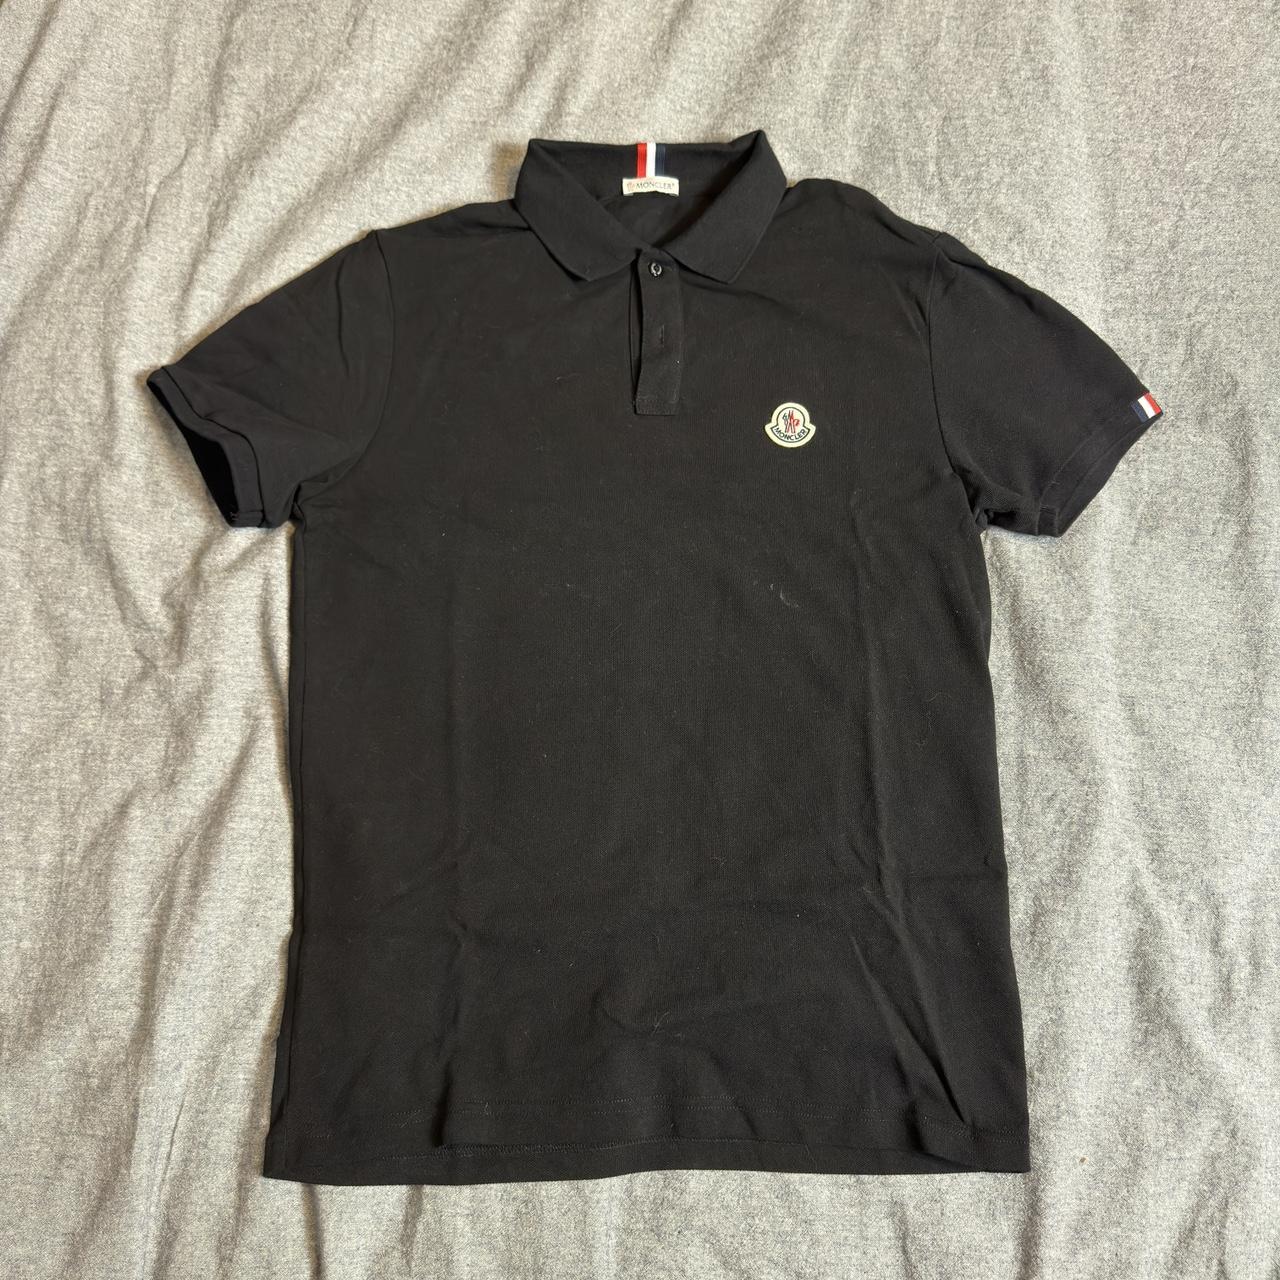 Moncler Polo - S. Free nationwide shipment. - Depop